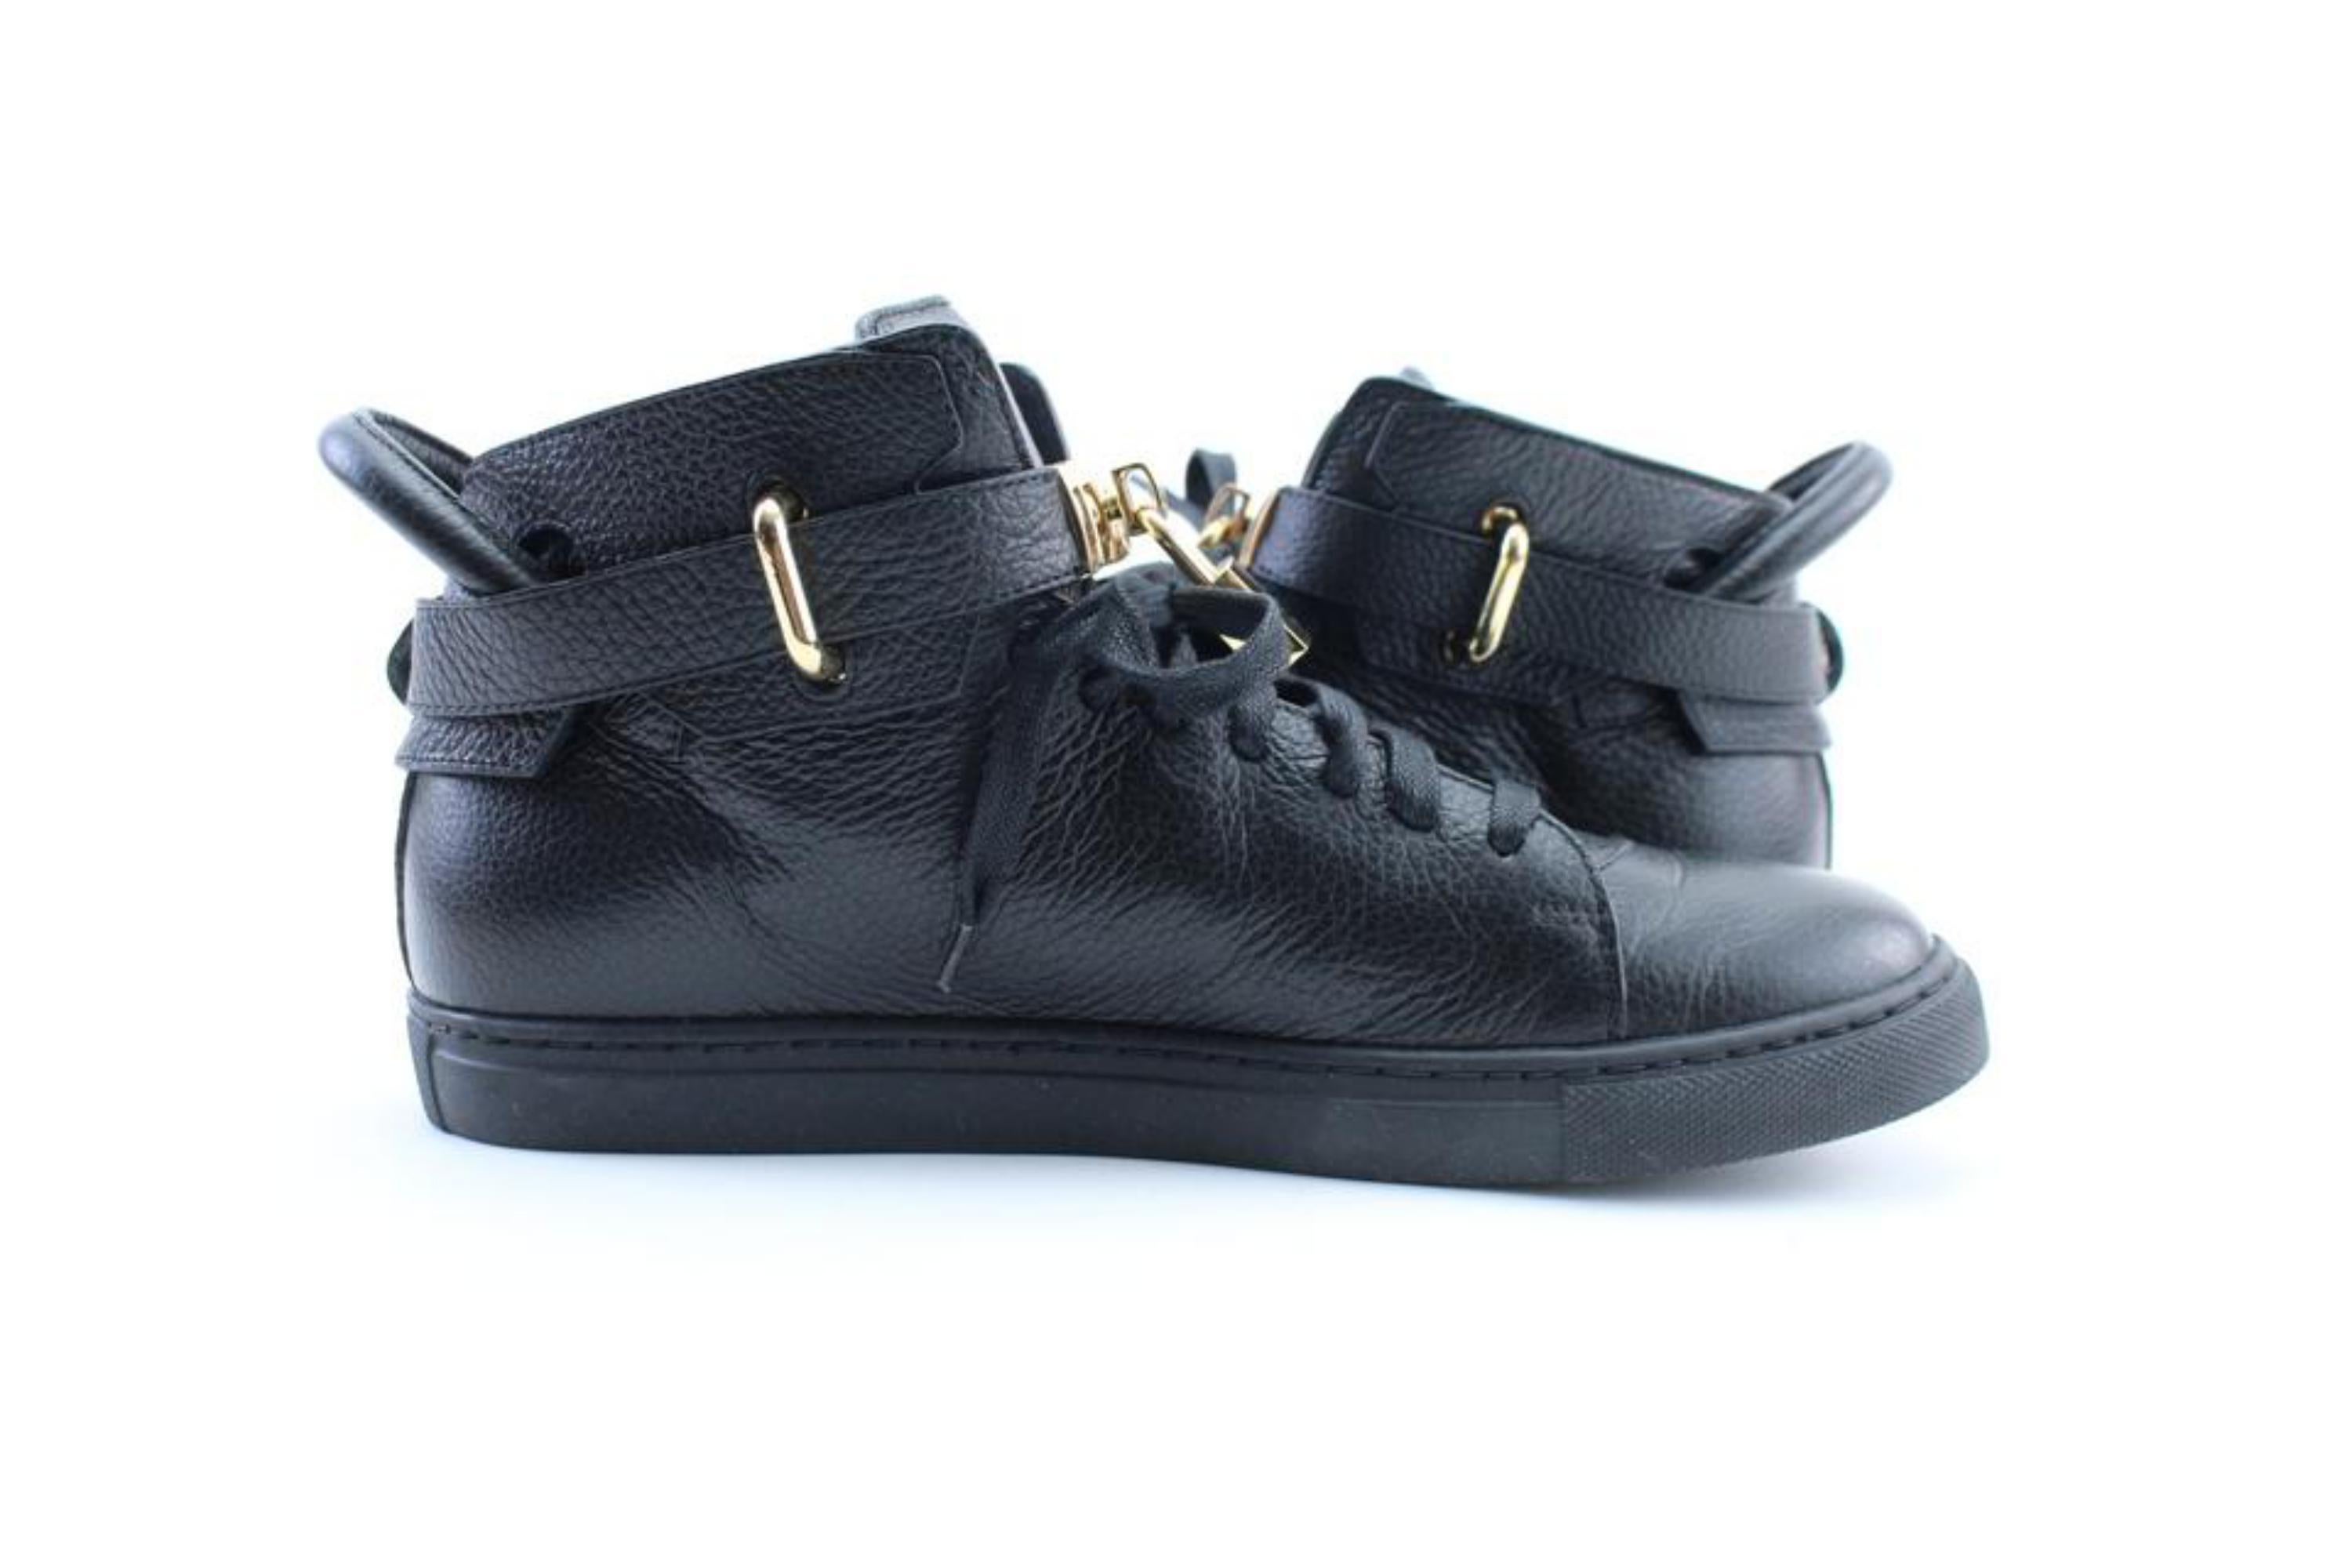 Buscemi Black 100mm High-top Padlock 22mr0212 Sneakers For Sale 6